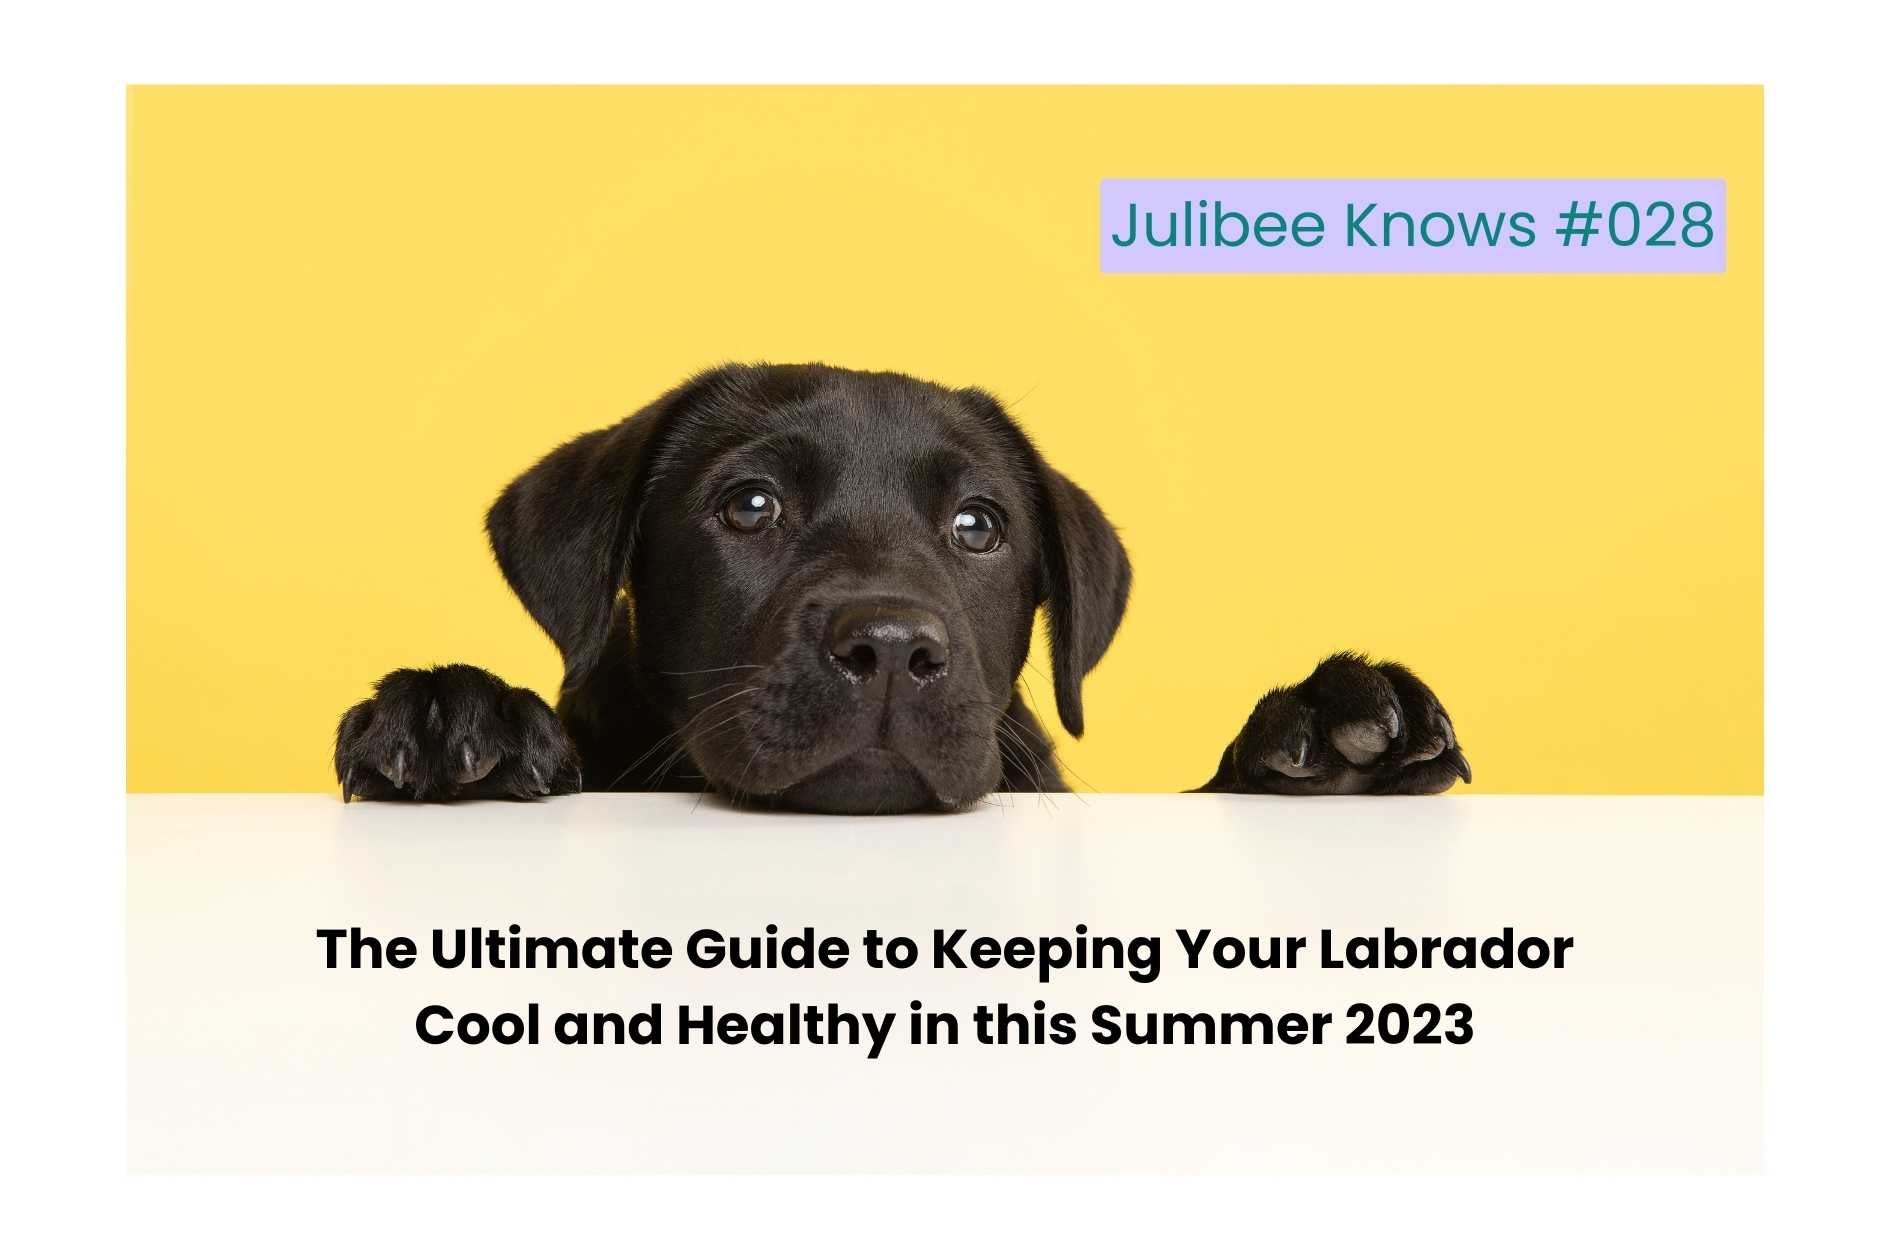 The Ultimate Guide to Keeping Your Labrador Cool and Healthy in this Summer 2023 - Julibee's